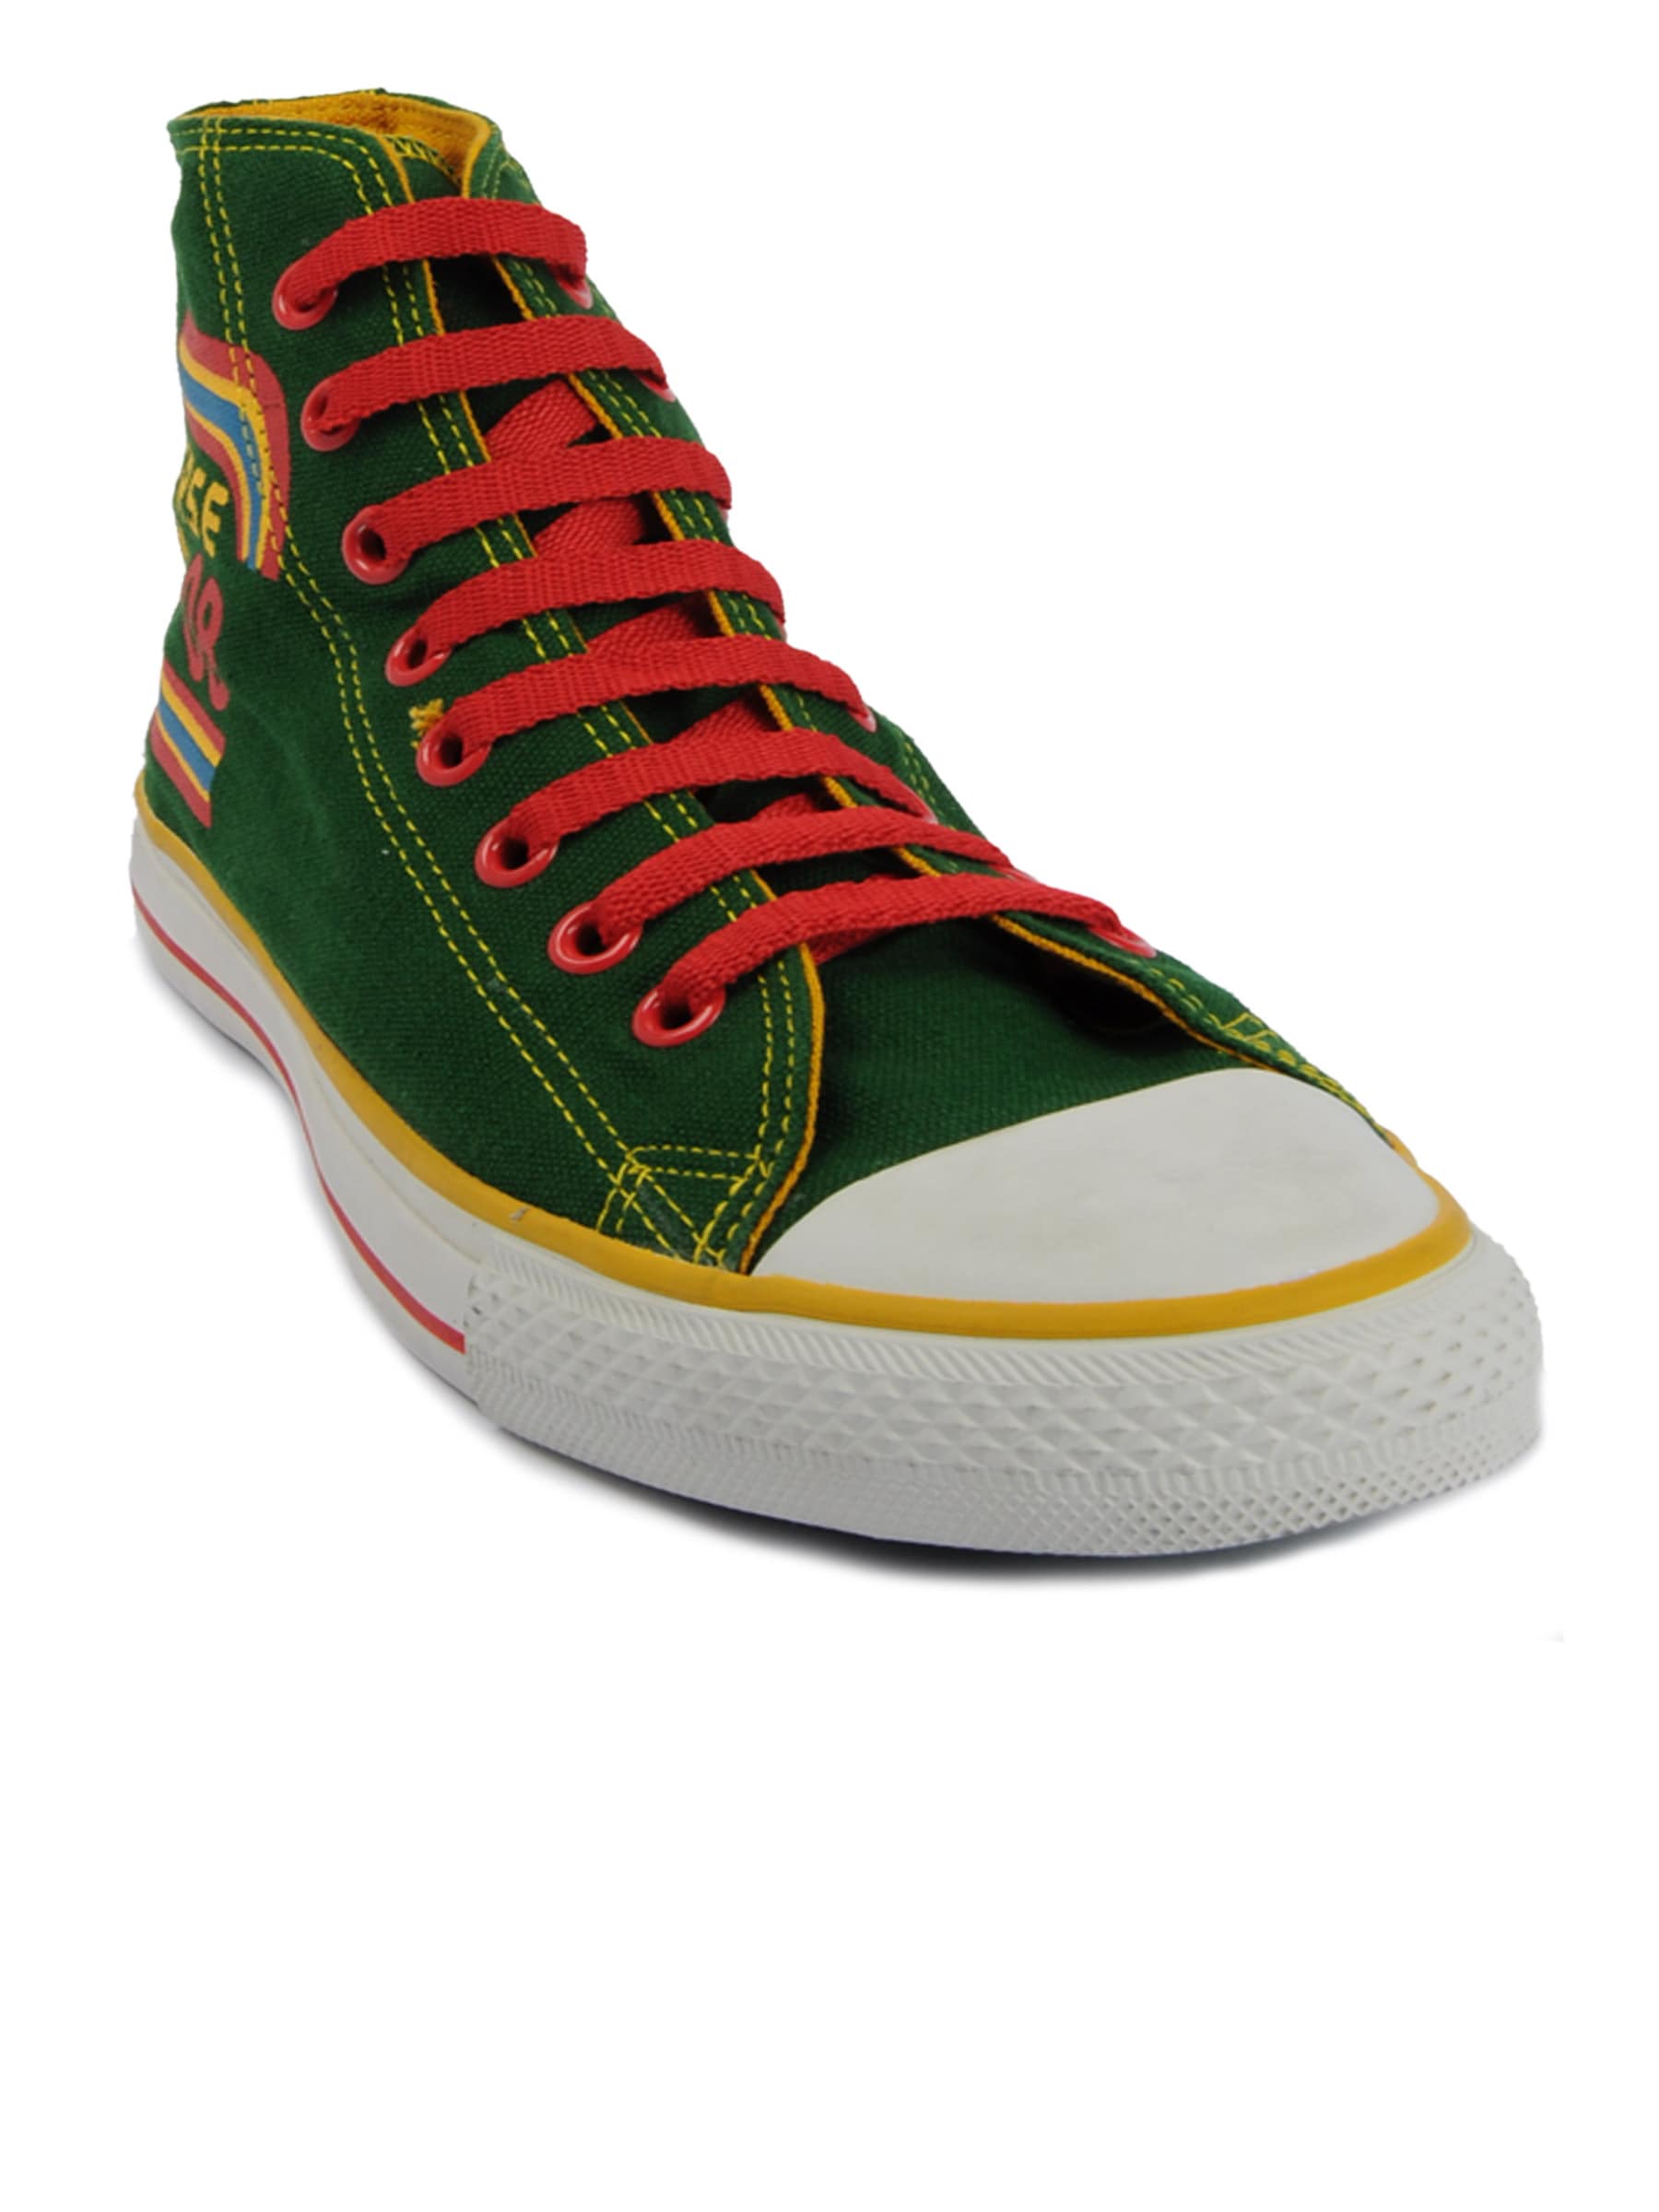 Converse Unisex Ct AsAll Star 08 Hi Green Casual Shoes